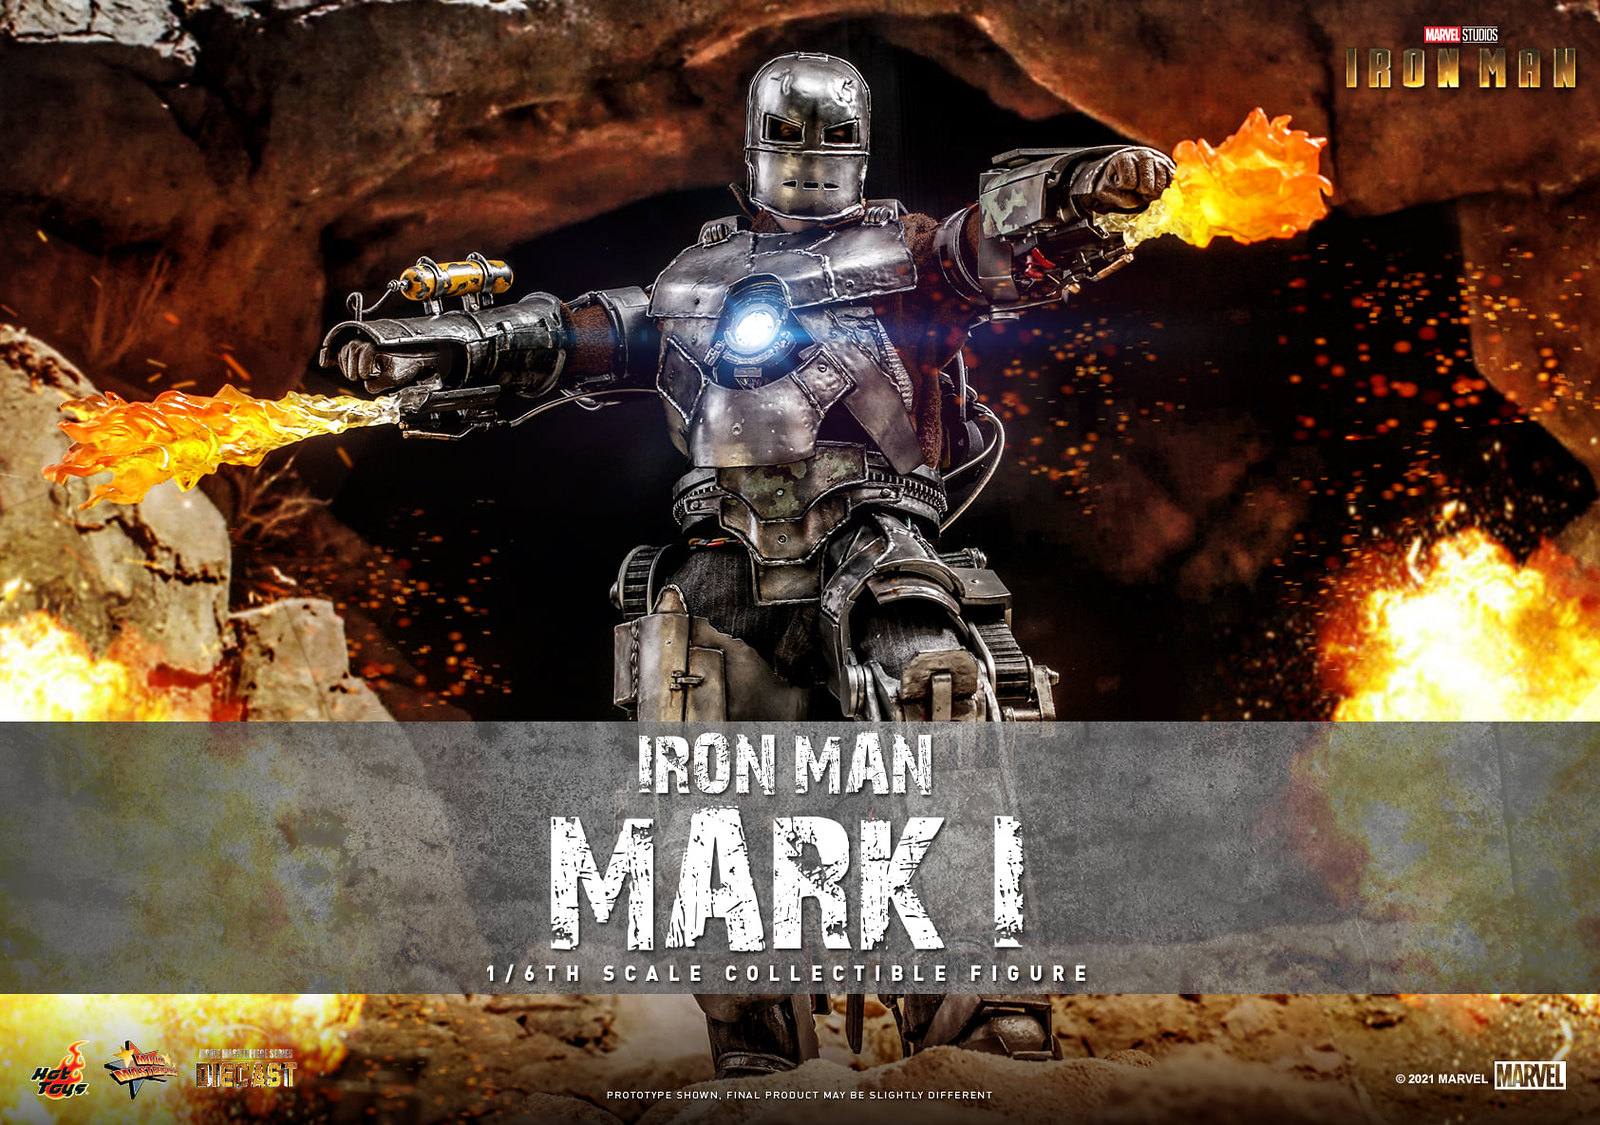 NEW PRODUCT: Hot Toys Iron Man - 1/6th scale Iron Man Mark I Collectible Figure 51311456768_b1aa4b5ba5_h